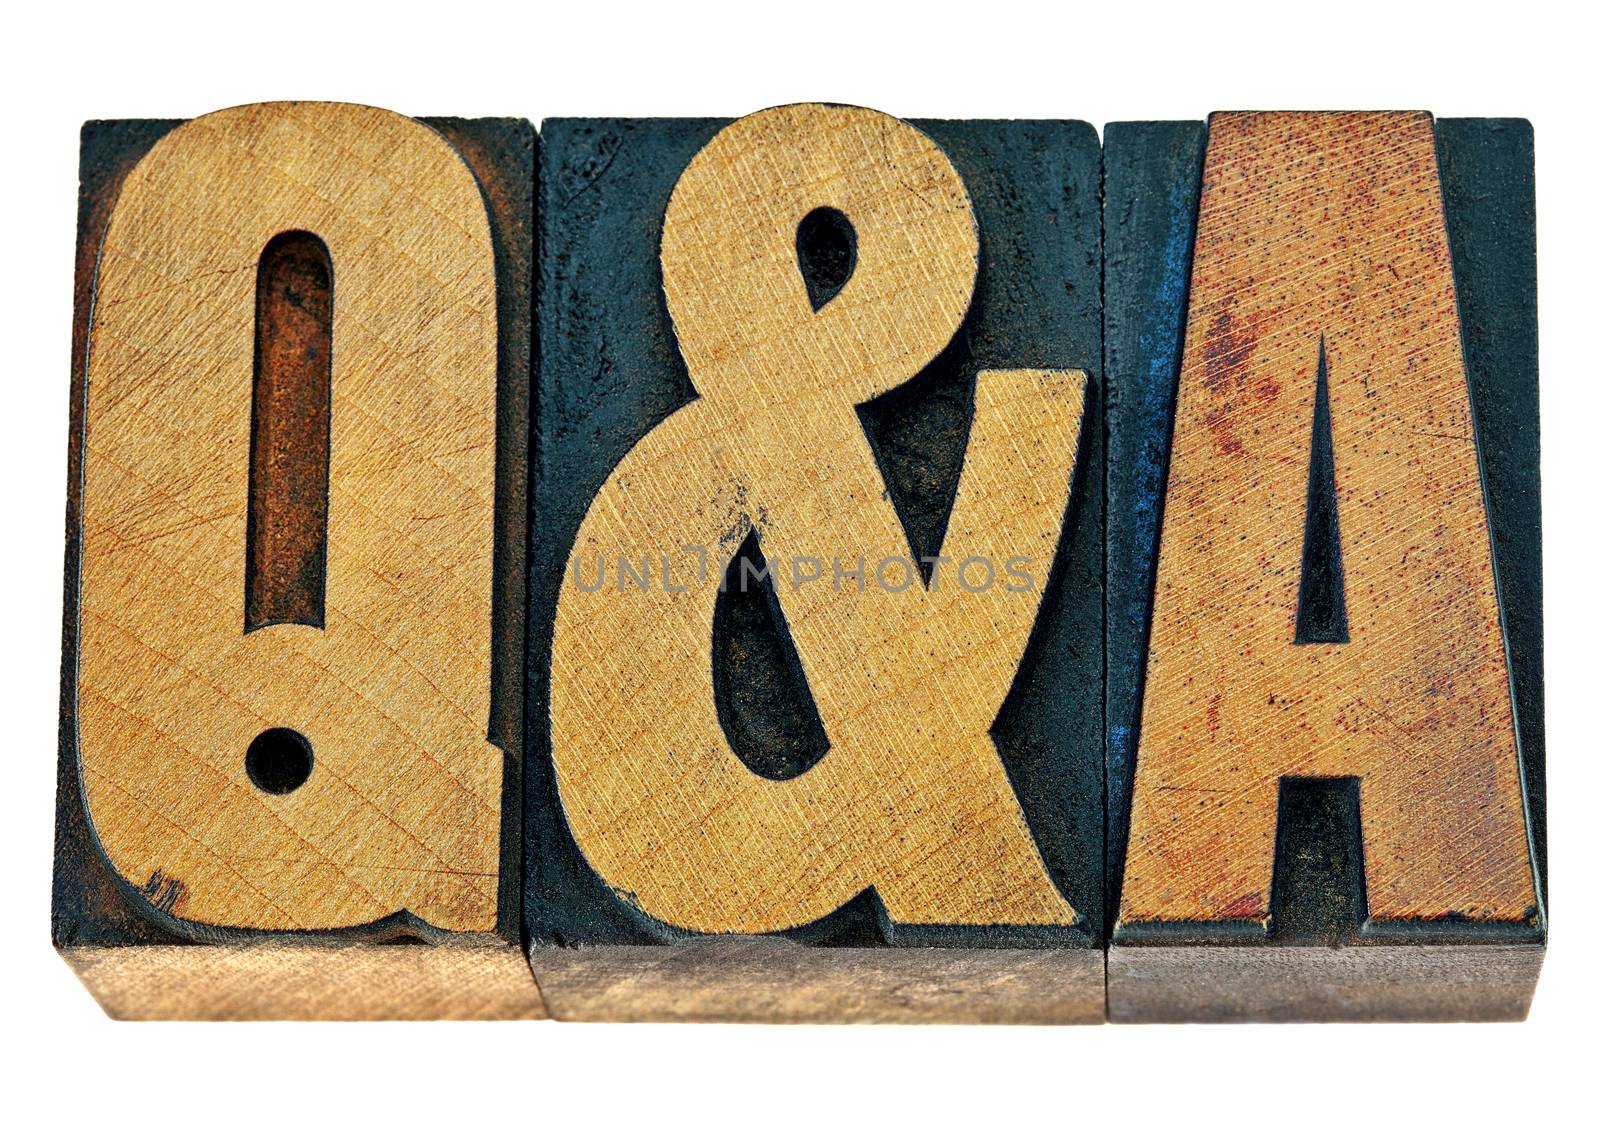 Q&A - questions and answers acronym - isolated text in vintage letterpress wood type printing blocks